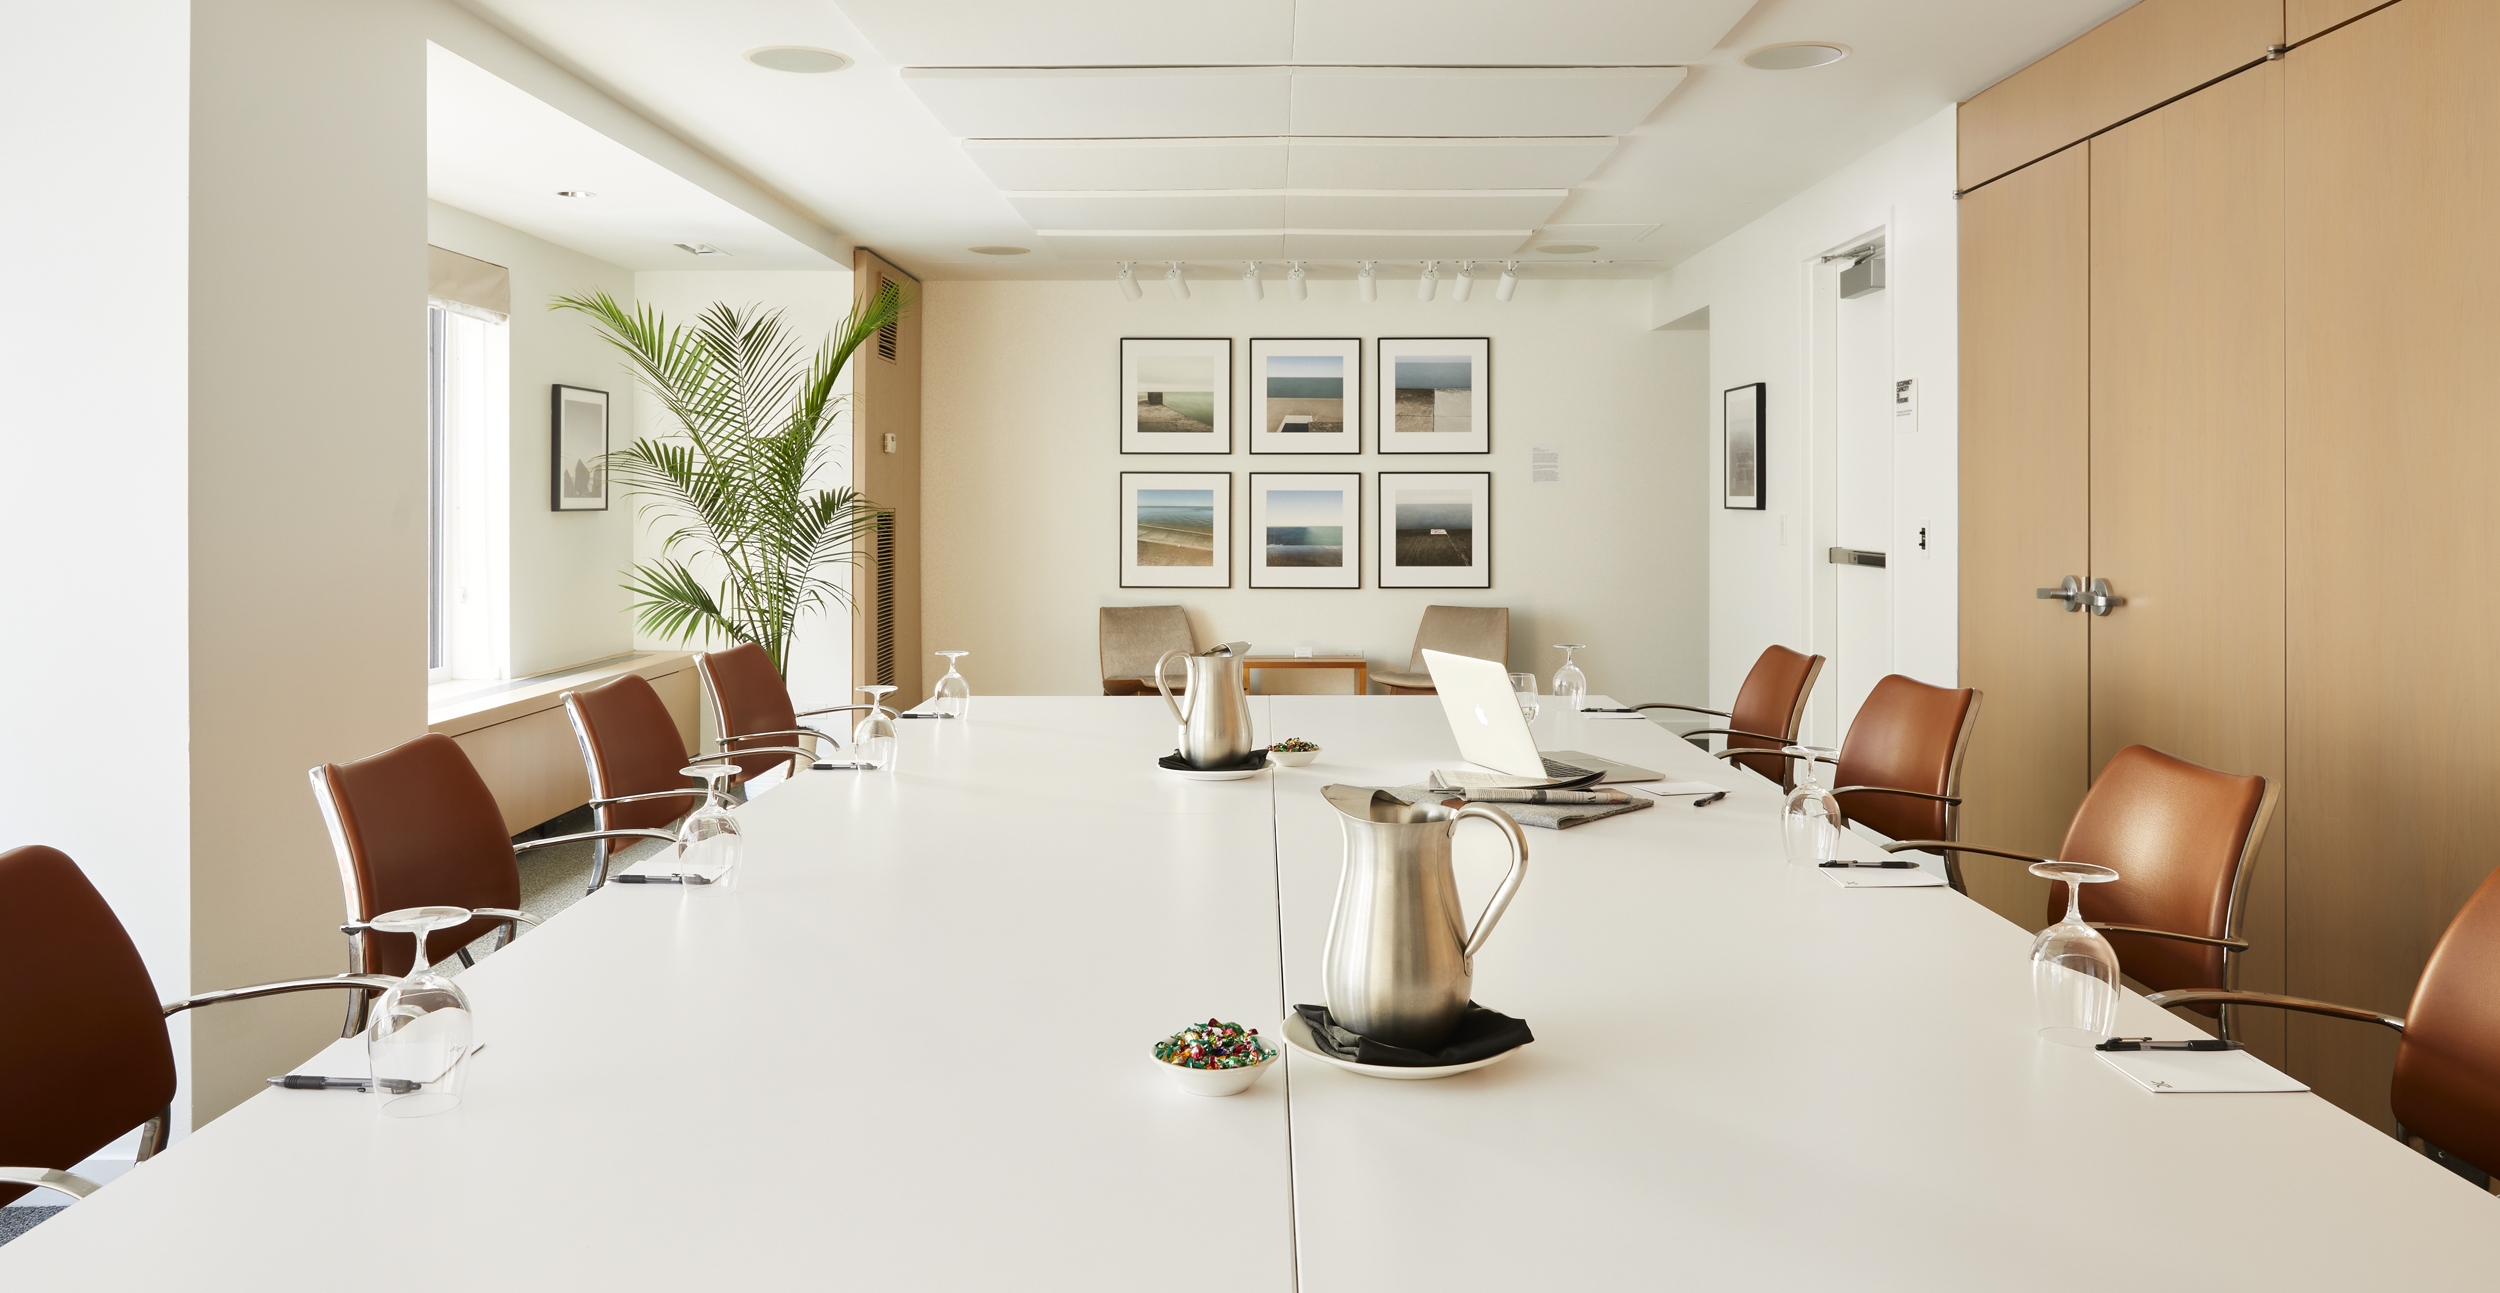 A large and spacious boardroom with pitchers or water